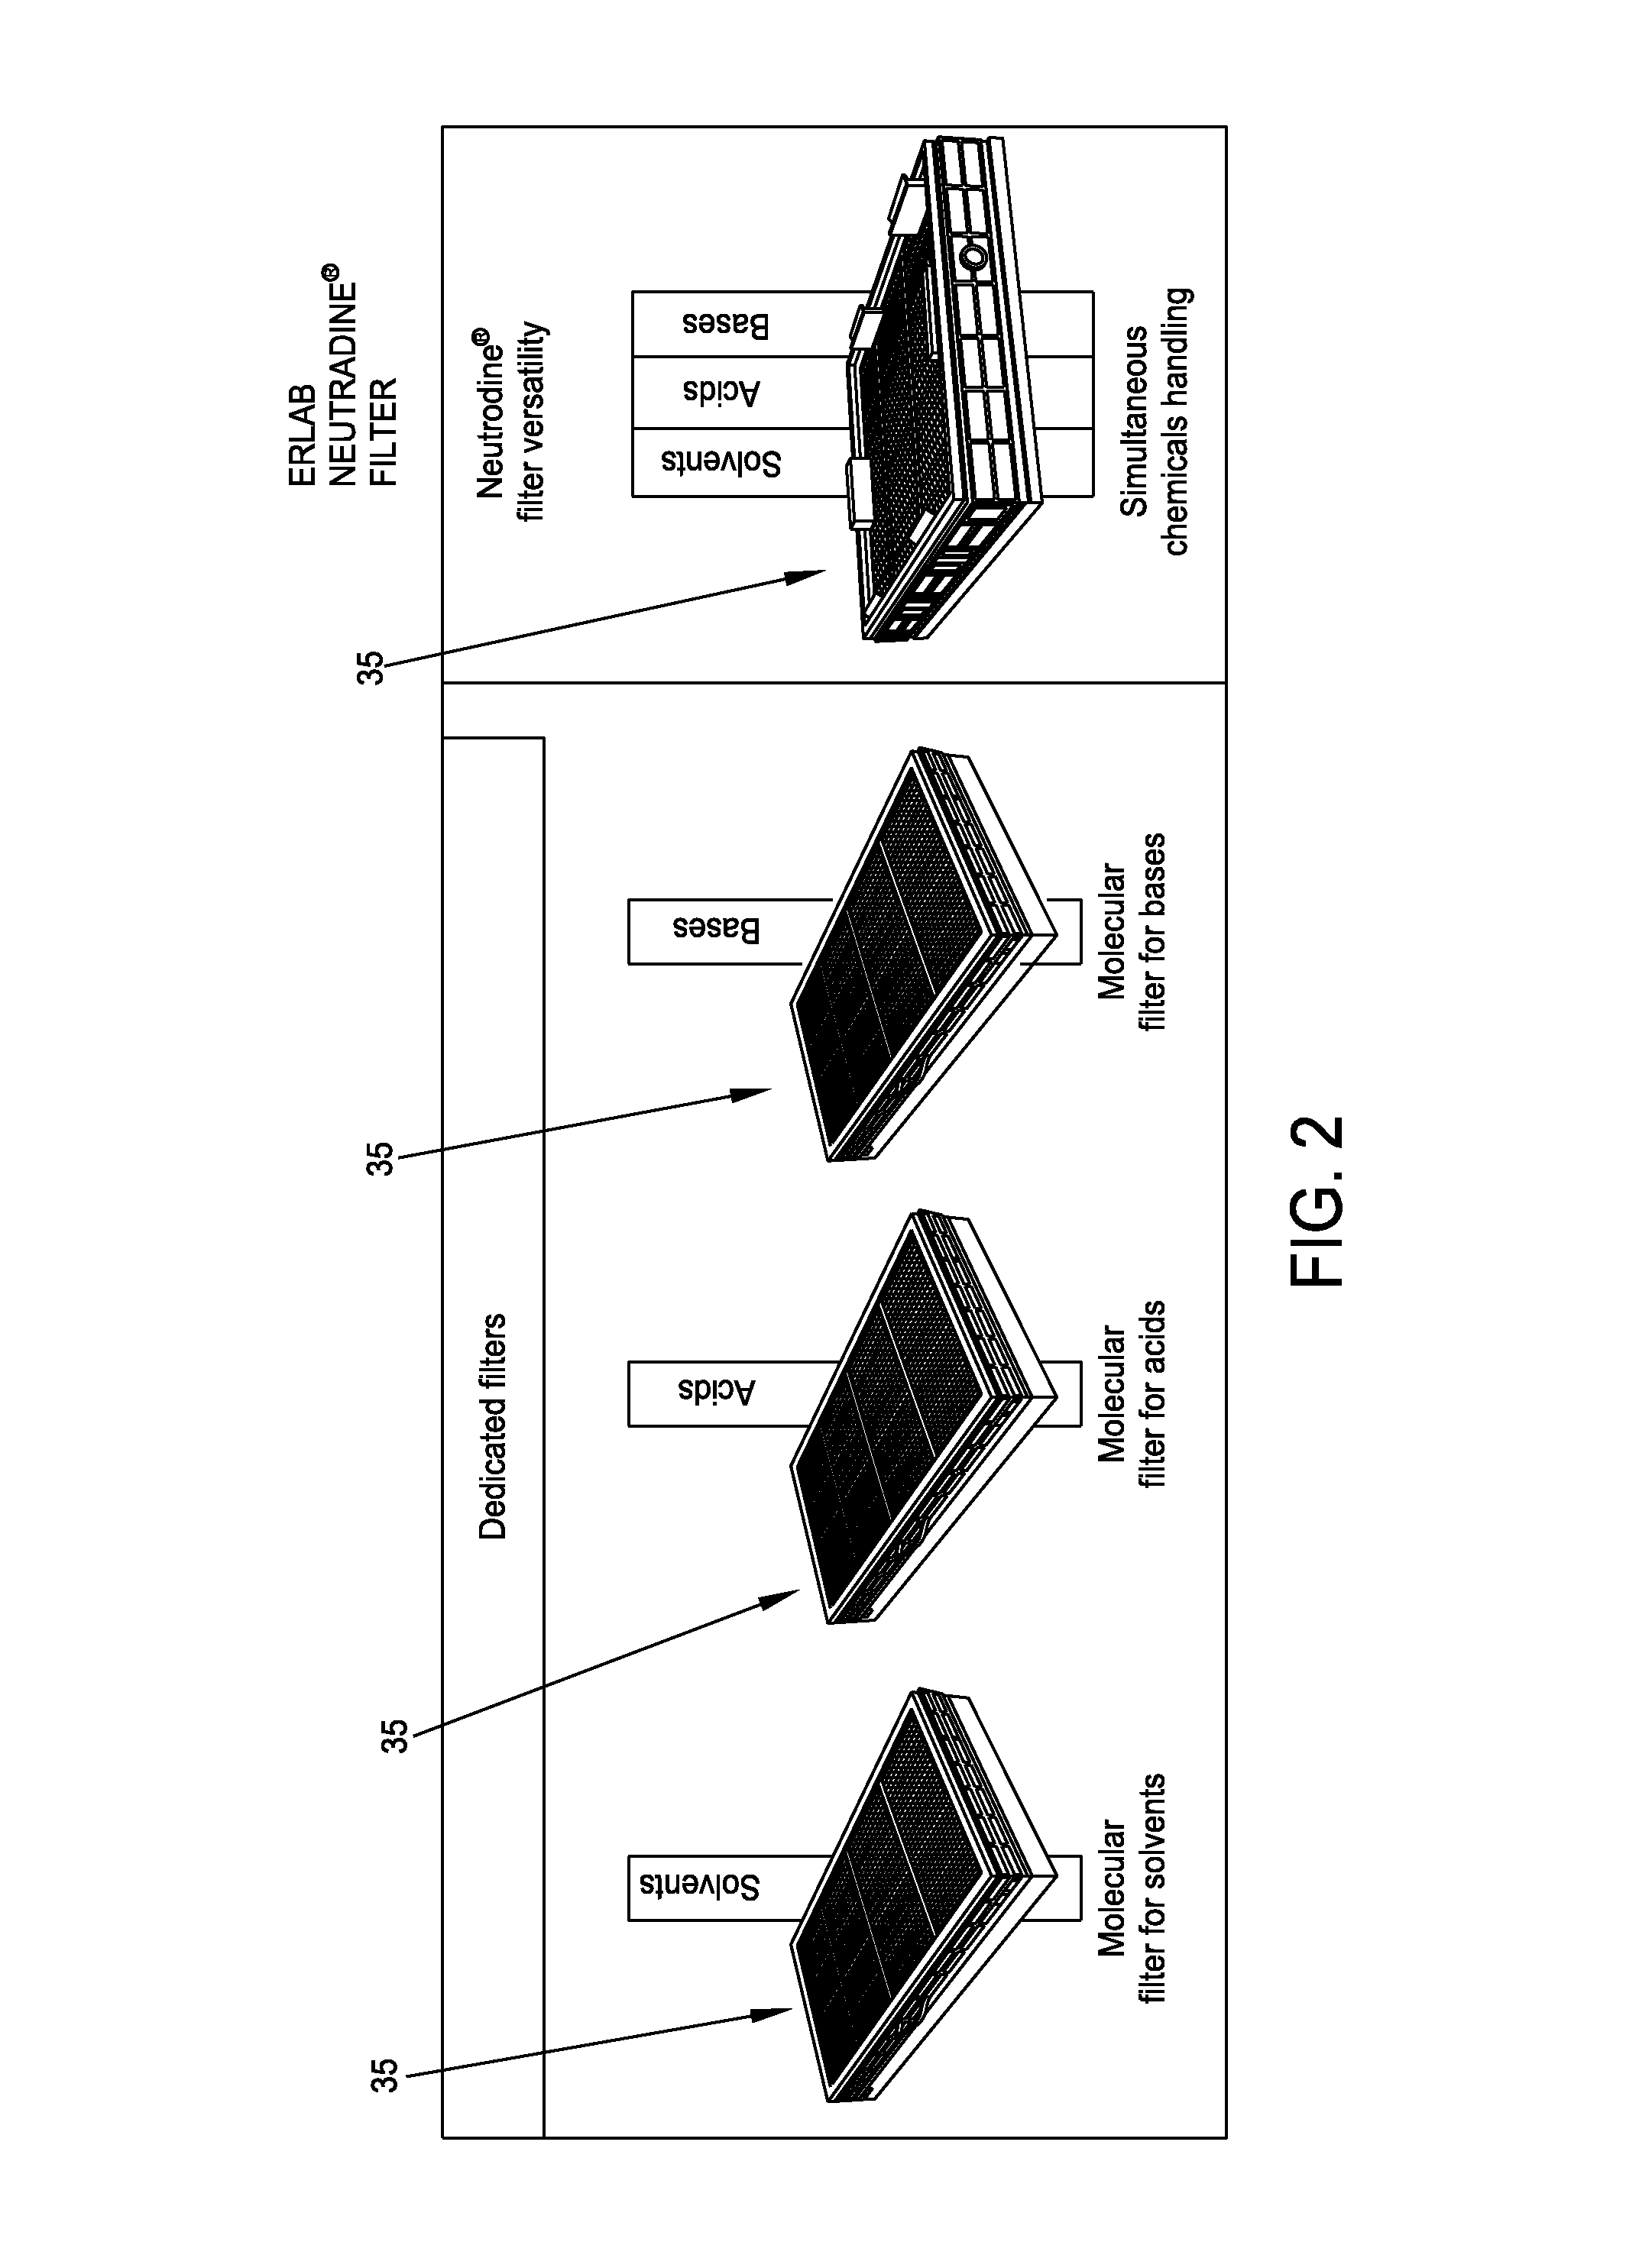 Method and apparatus for monitoring and ensuring air quality in a building